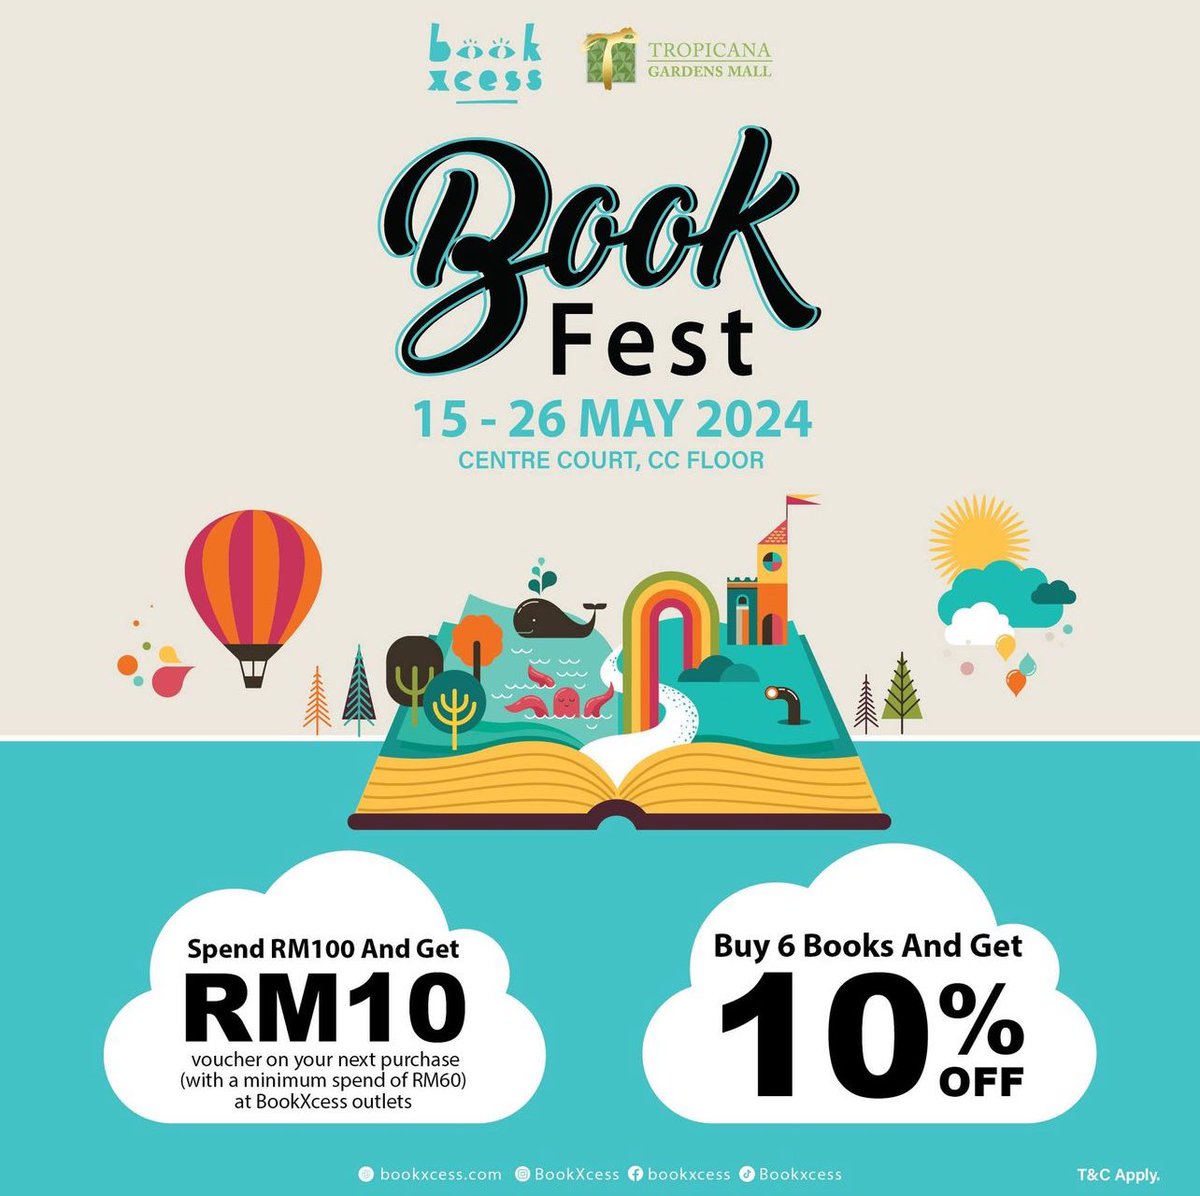 Get 10% off when you purchase 6 books or more at the BookXcess Book Fest at Tropicana Gardens Mall. We are also giving out vouchers worth RM10! Check out the variety of genres & titles available. Date: 15 May - 26 May 2024 Location: Center Court CC Floor Tropicana Gardens Mall